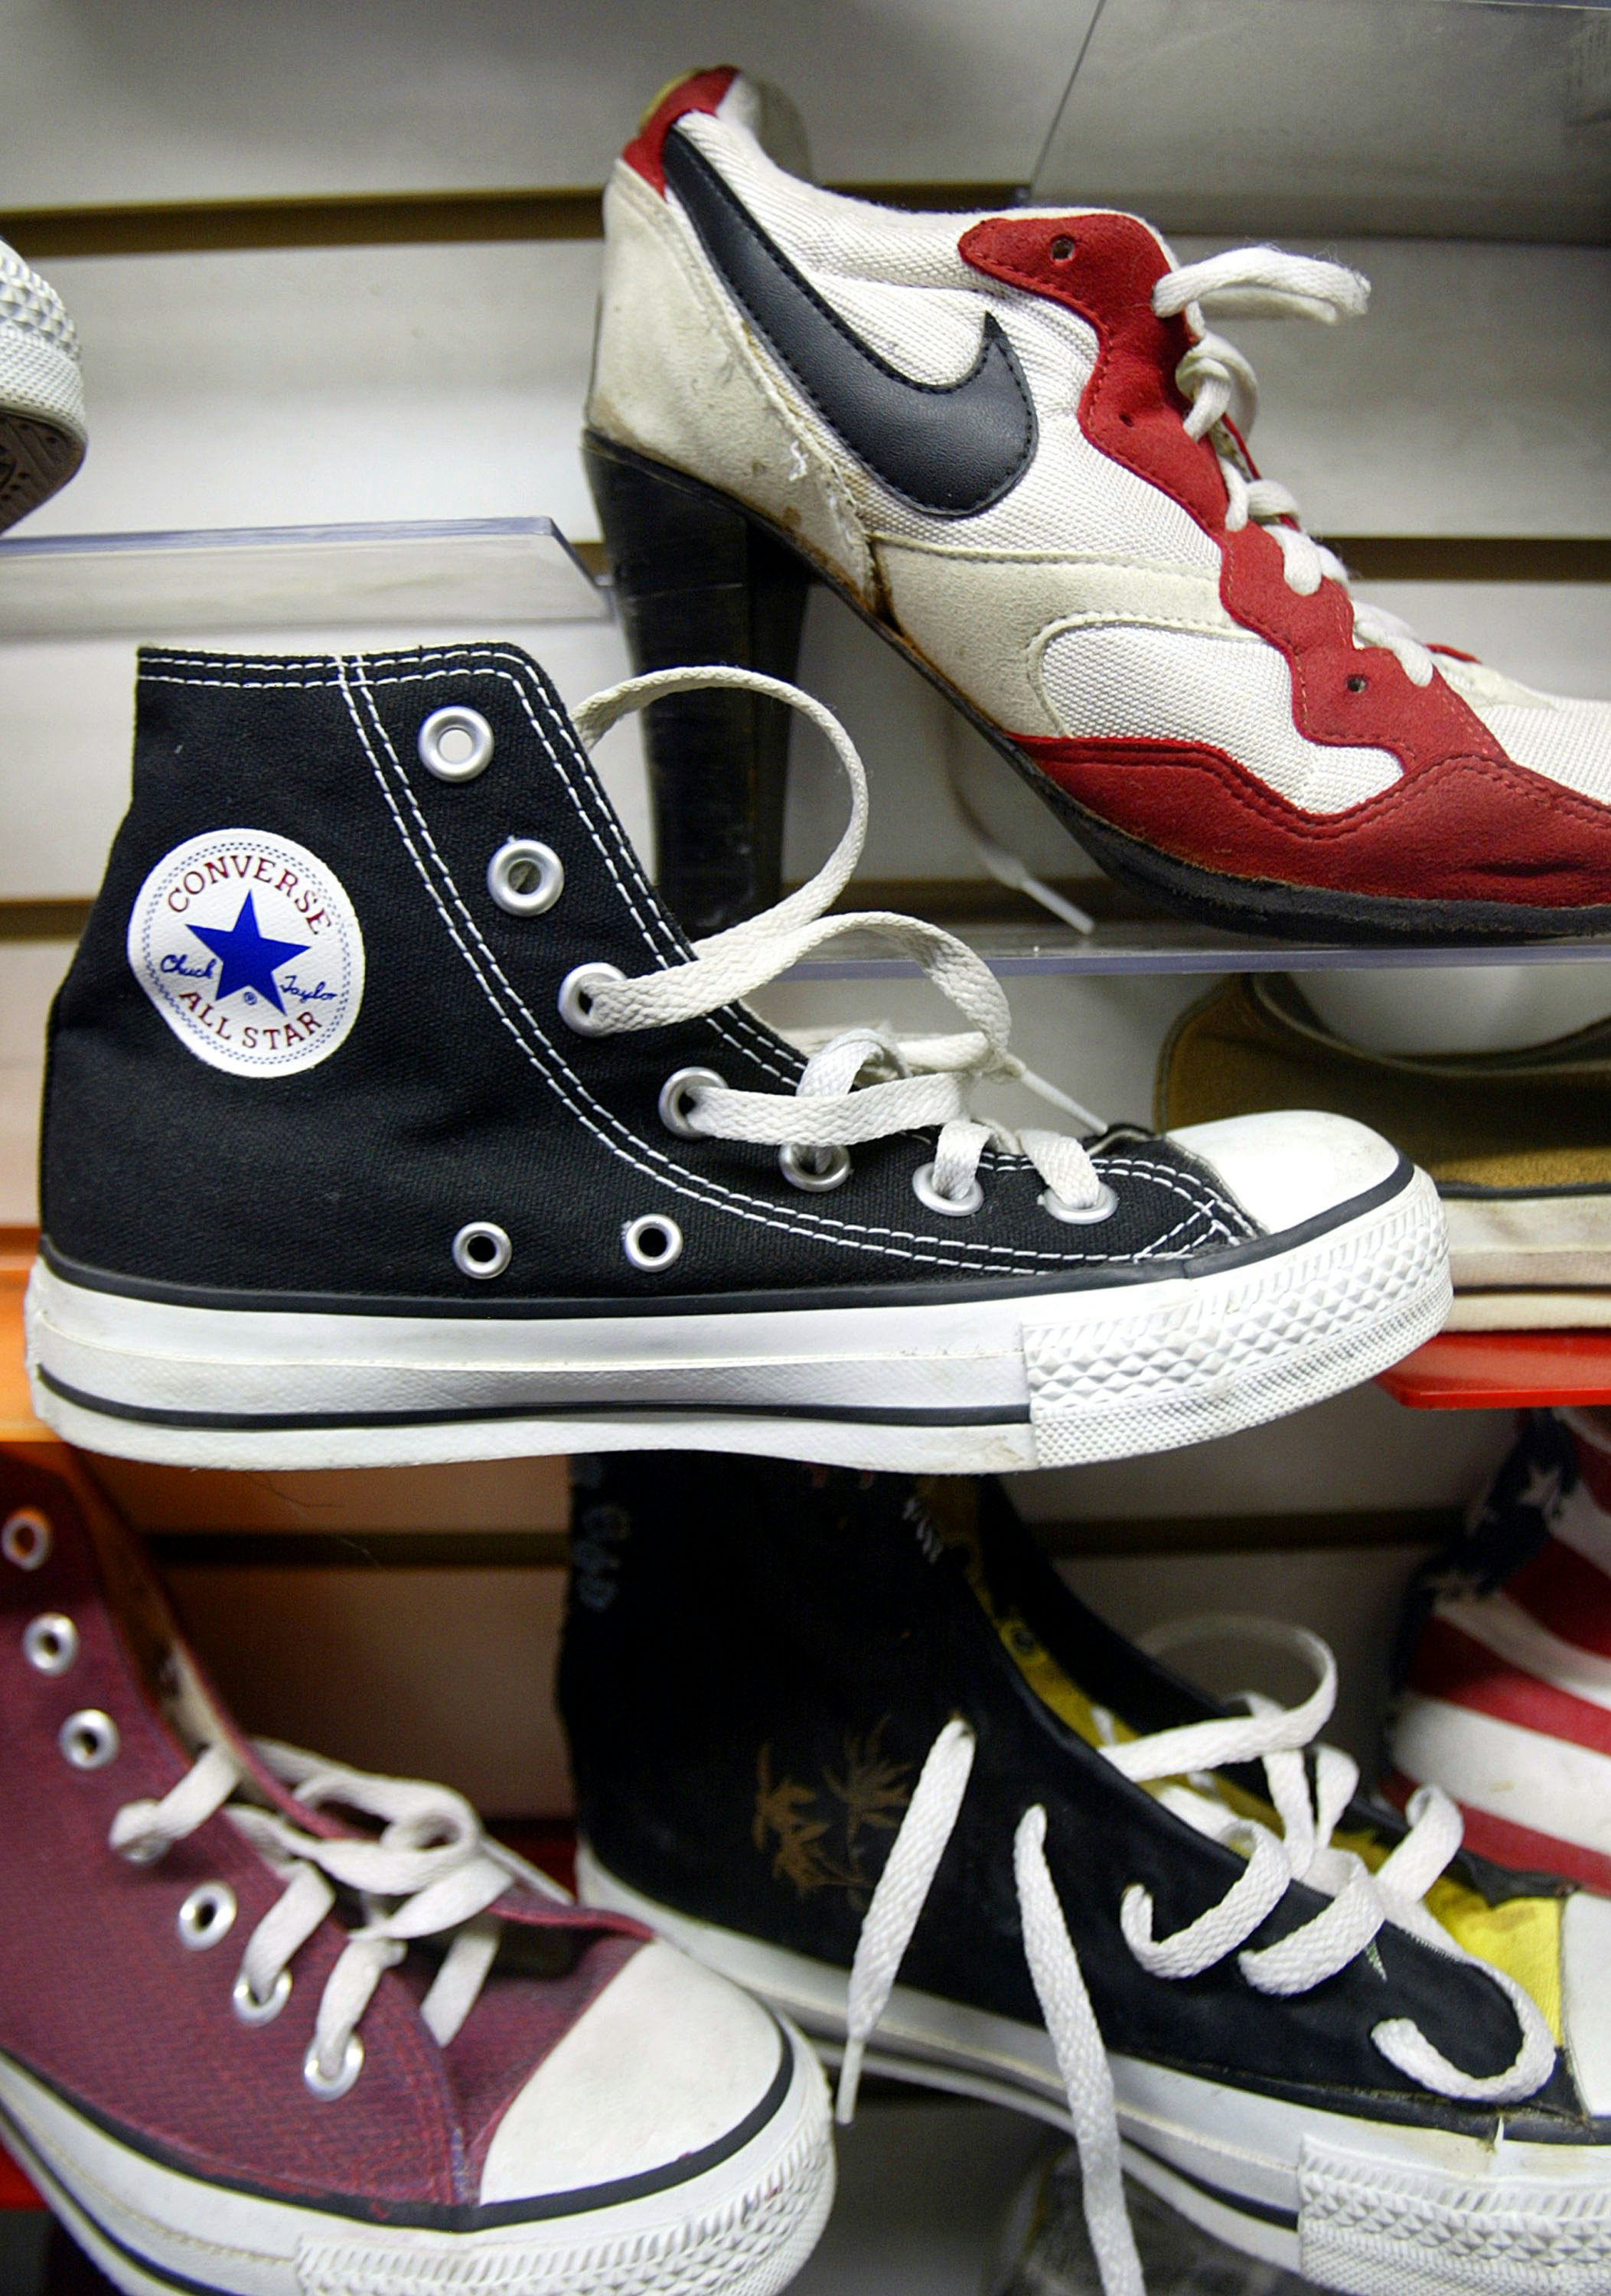 converse shoes on sale at walmart